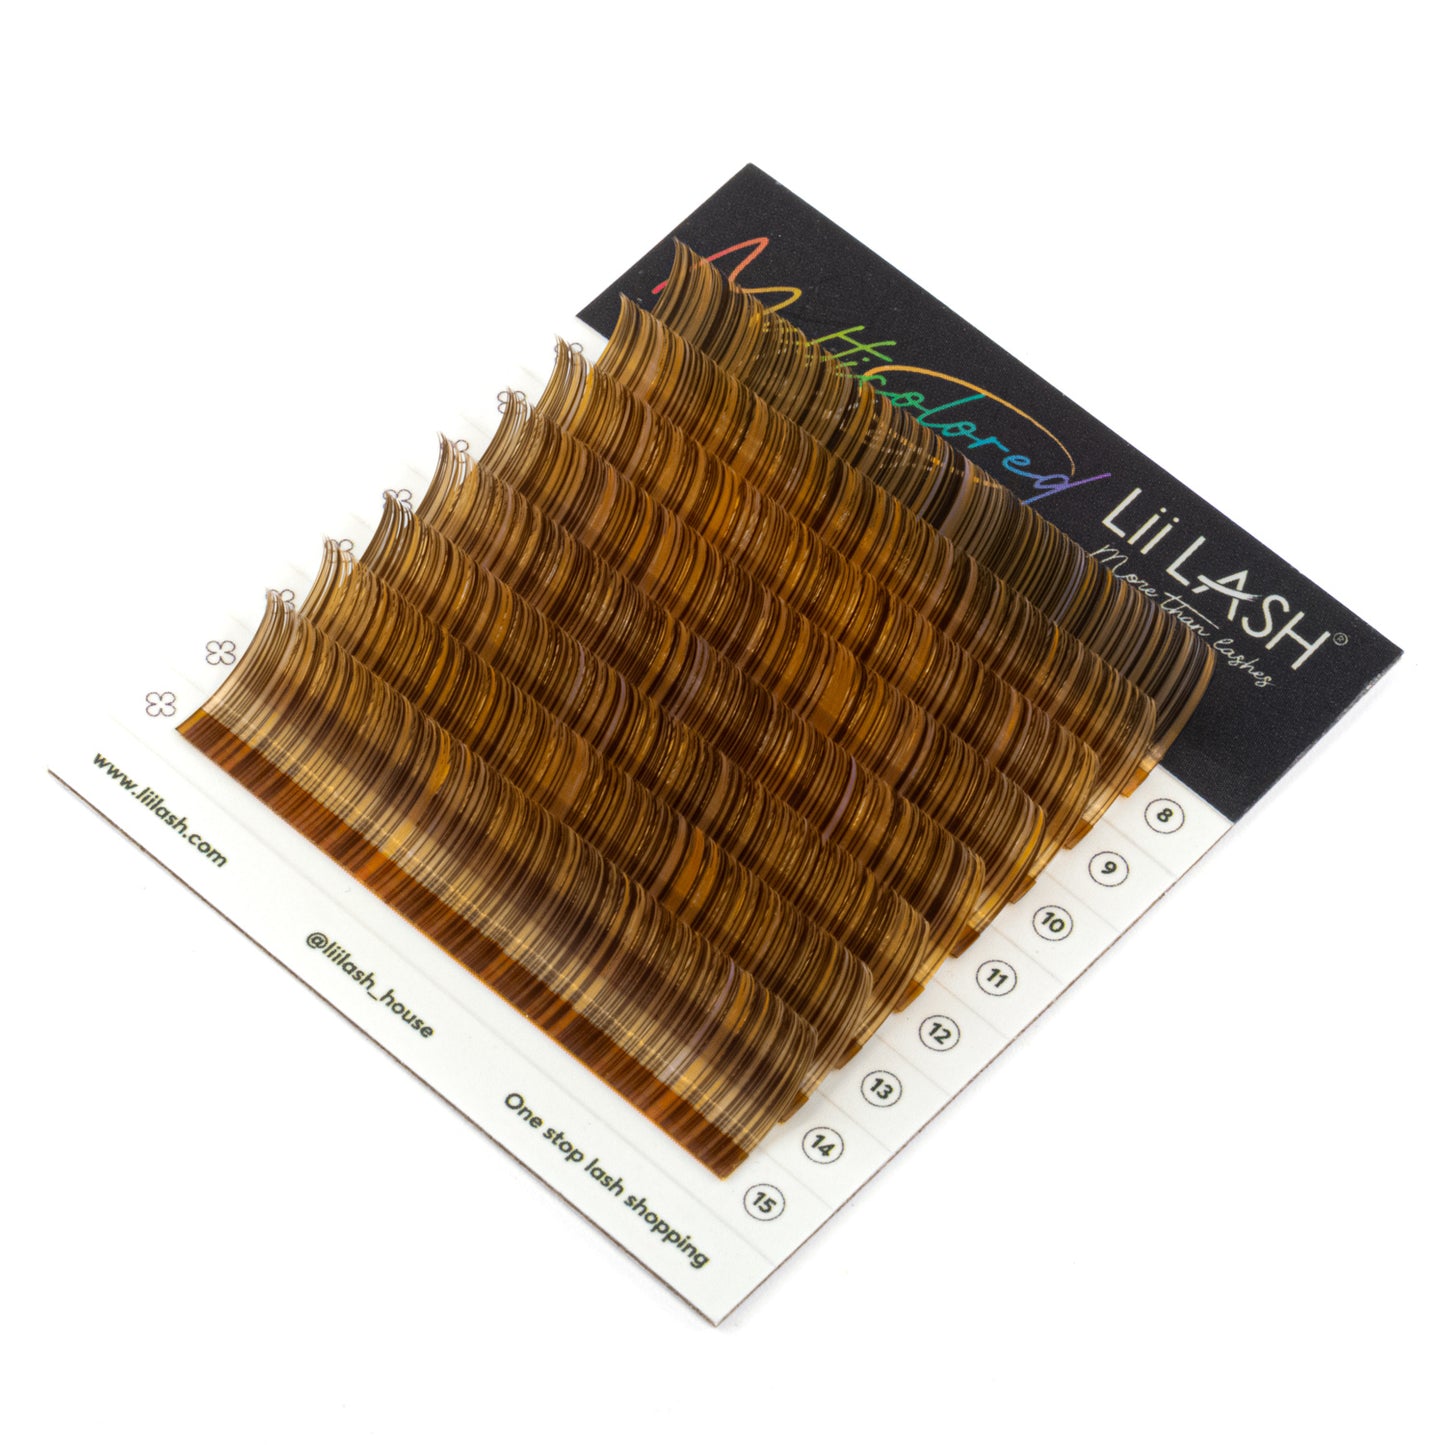 Multicolored - Koffee Lashes - 0.07mm